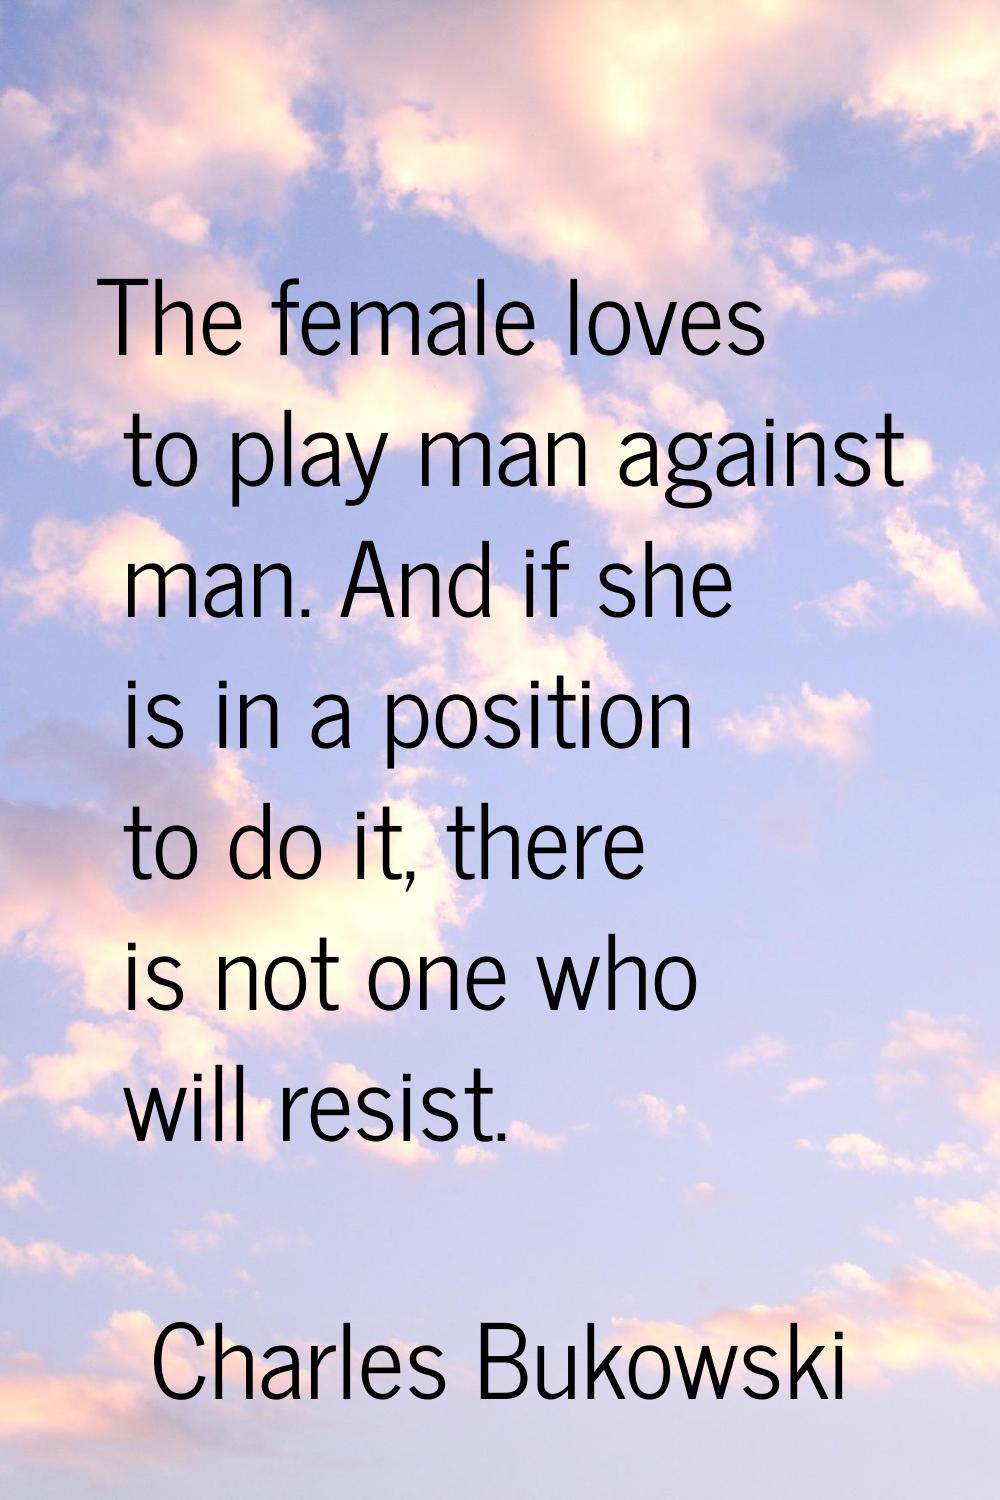 The female loves to play man against man. And if she is in a position to do it, there is not one wh